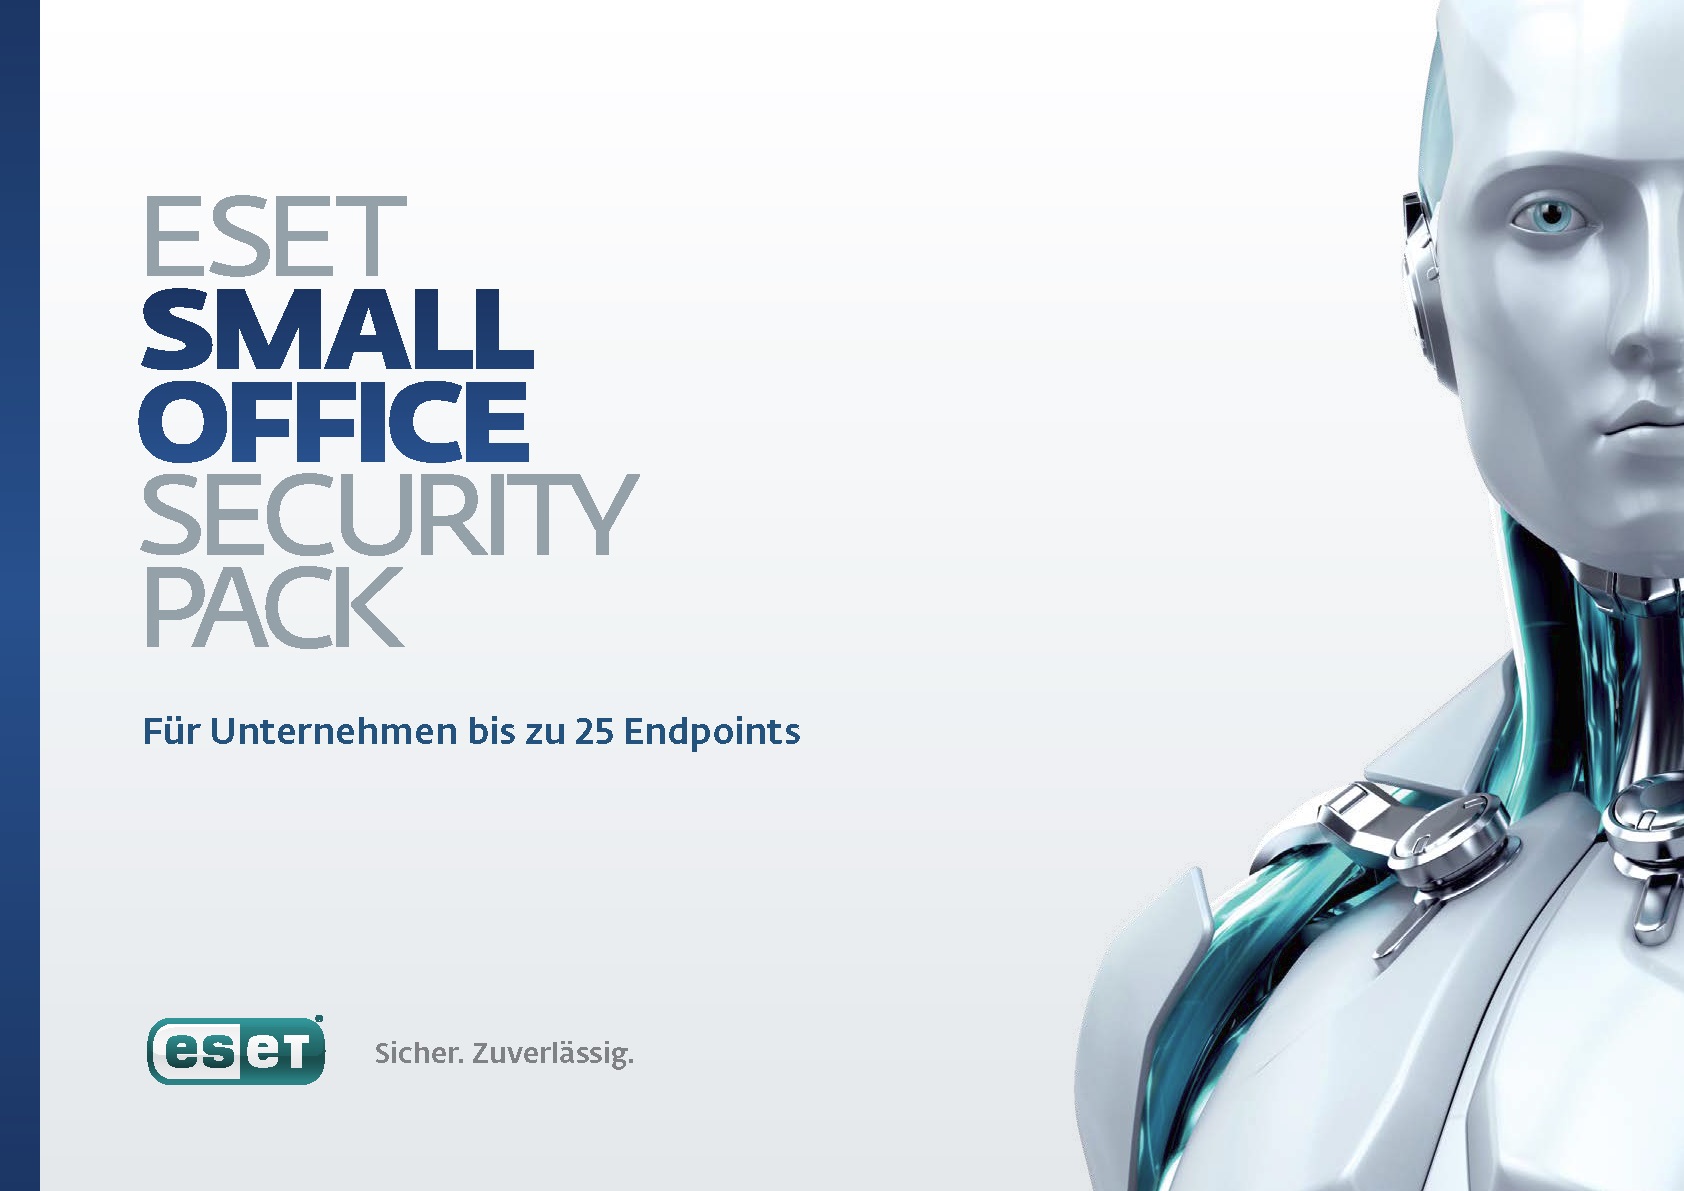 ESET Small Office Security